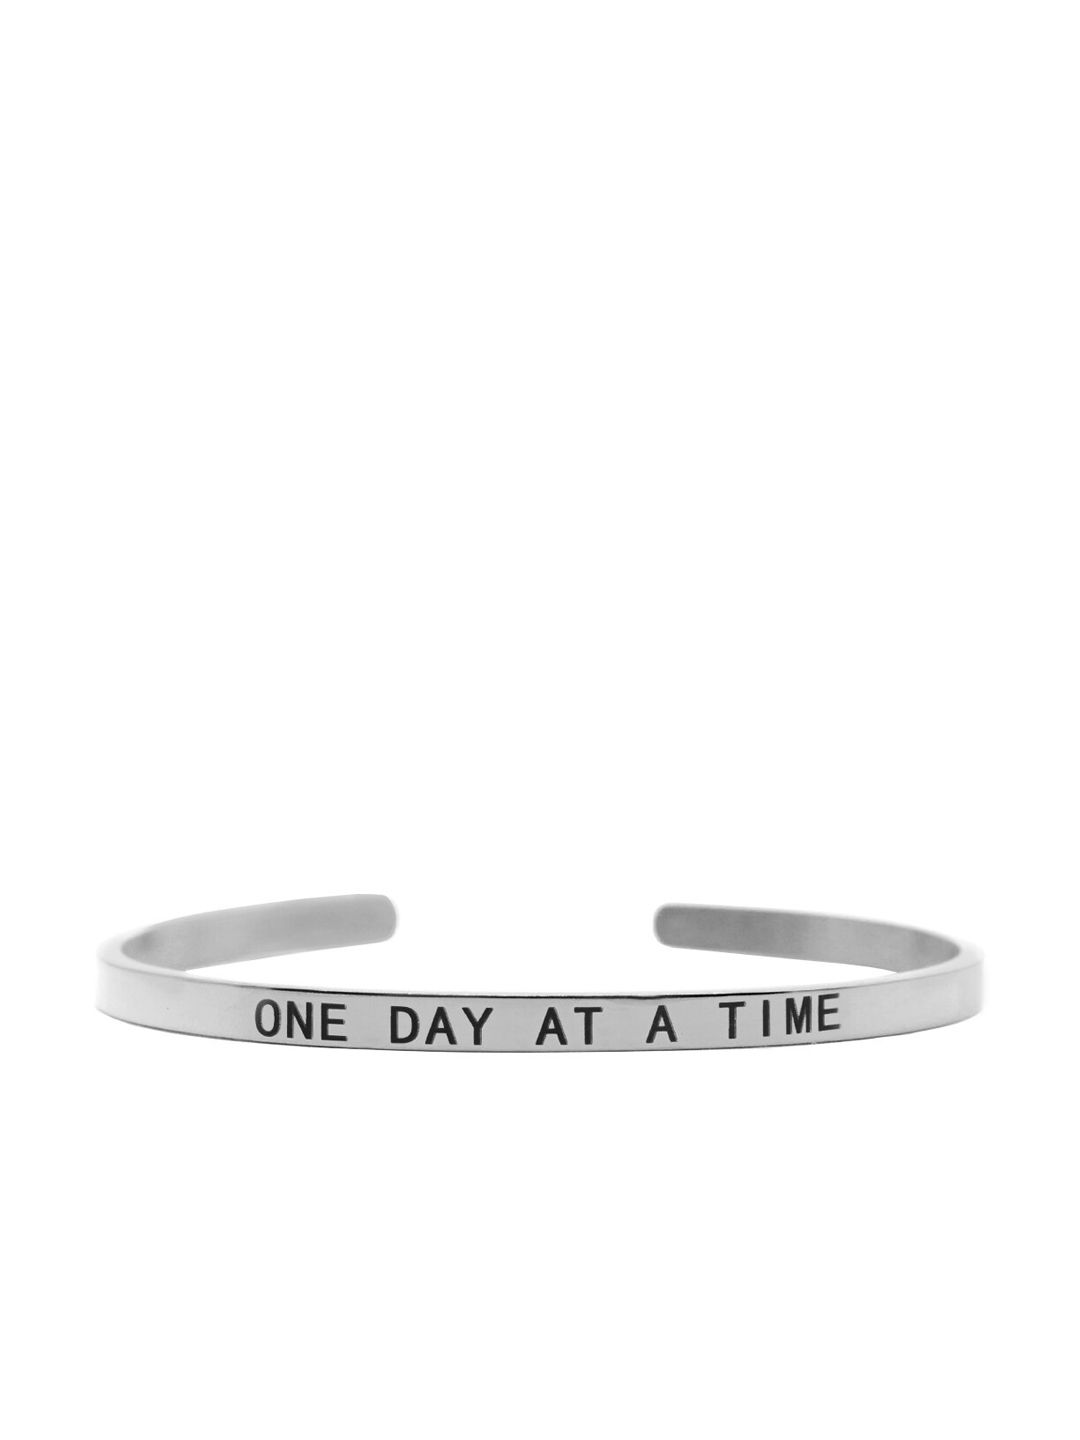 JOKER & WITCH Silver-Toned One Day at a Time Cuff Bracelet Price in India